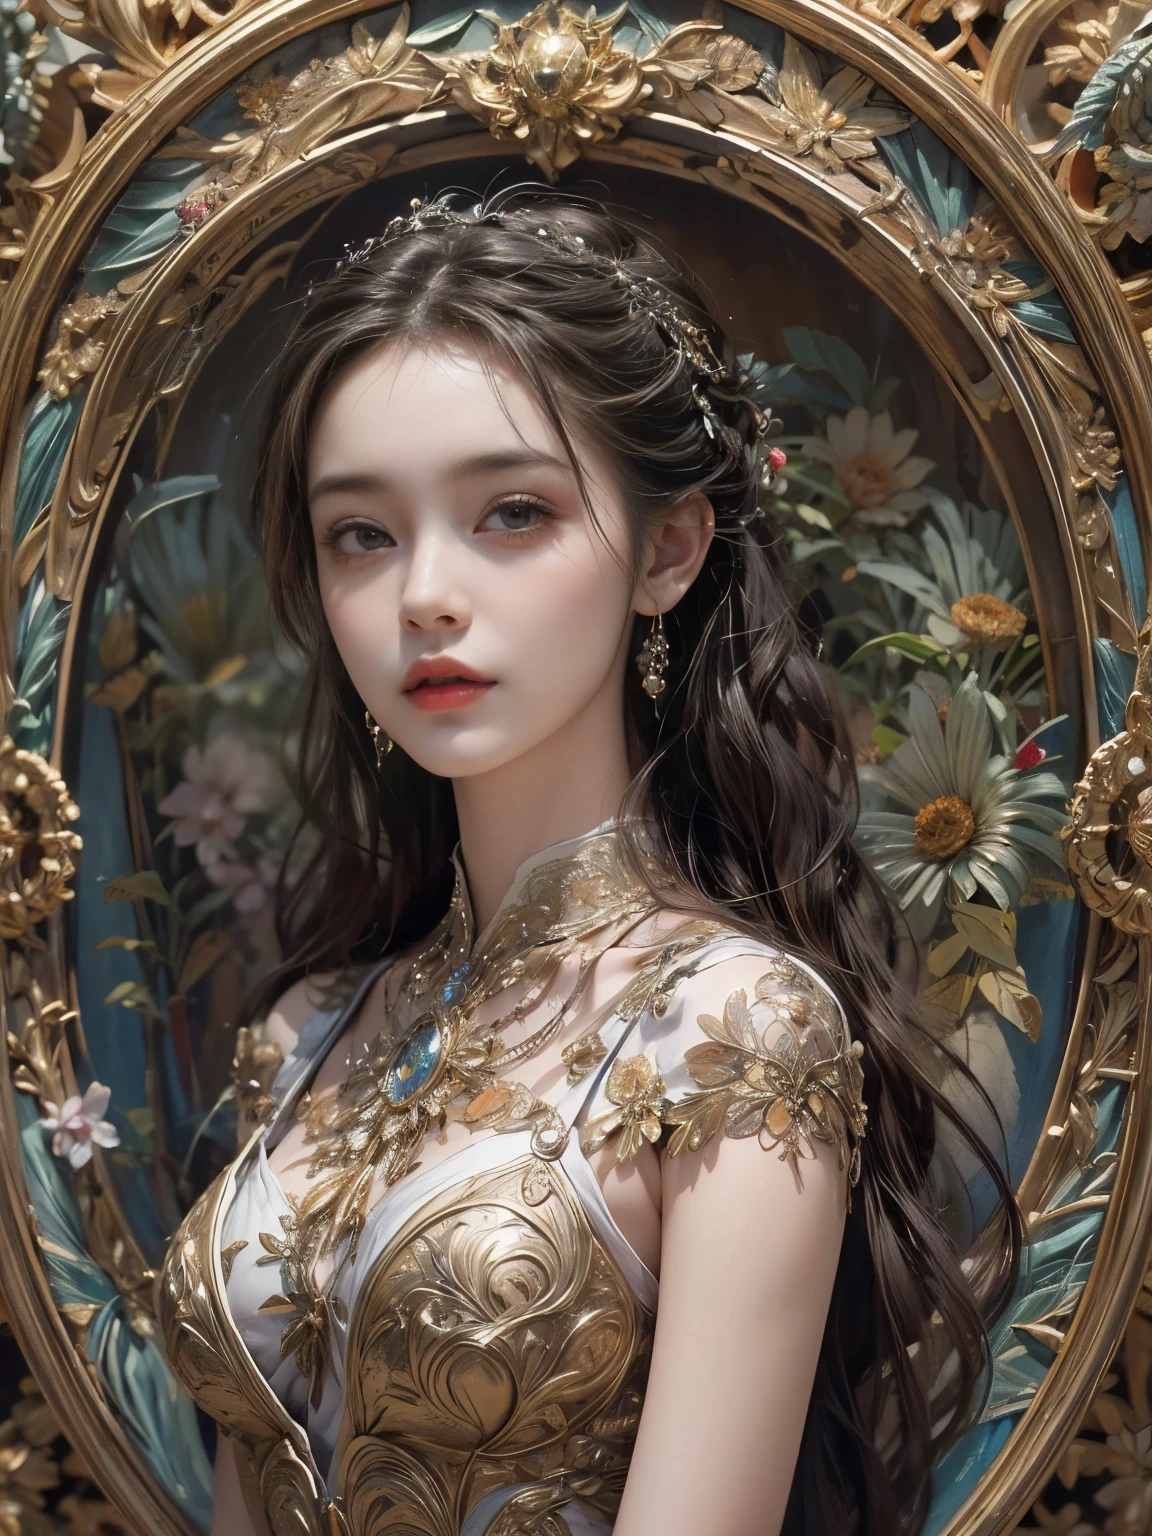 (8k, highest quality, masterpiece: 1.2), (Realistic, photoRealistic: 1.37), Super detailed, One Girl, Wide viewing angles, huge firm bouncing bust, Very delicate depiction, Miniature painting, Detailed depiction of the face, Detailed depiction of hair, Accurate skeleton, Dress with intricate patterns, Complicated armor,  